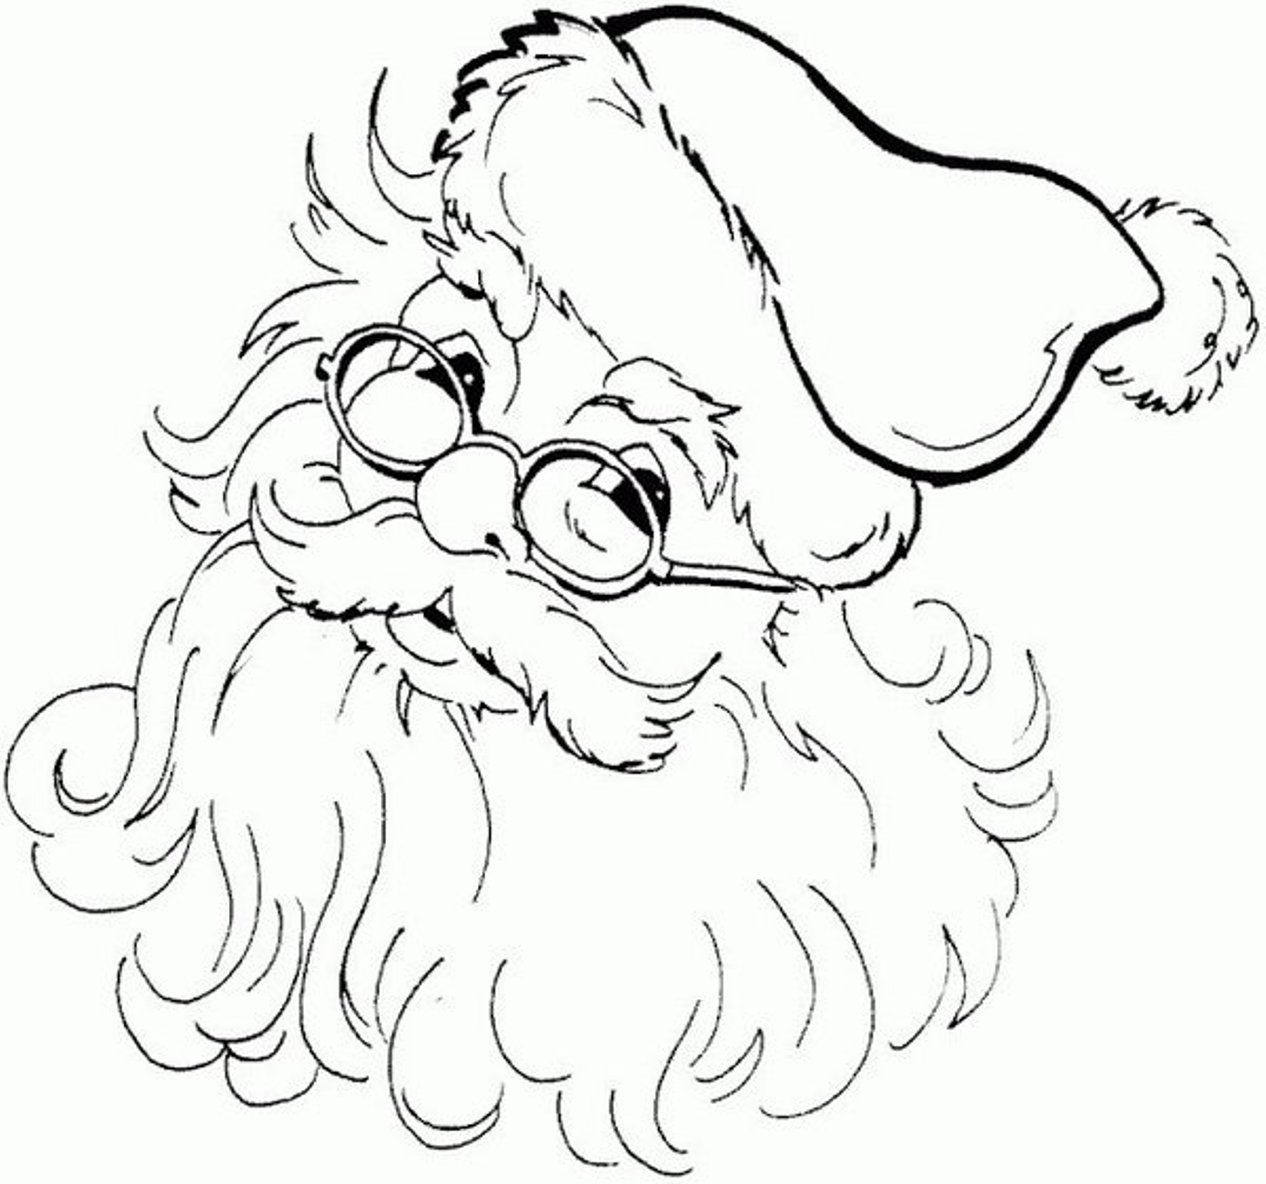 Santa Claus Coloring Pages Printable | Christmas Coloring pages